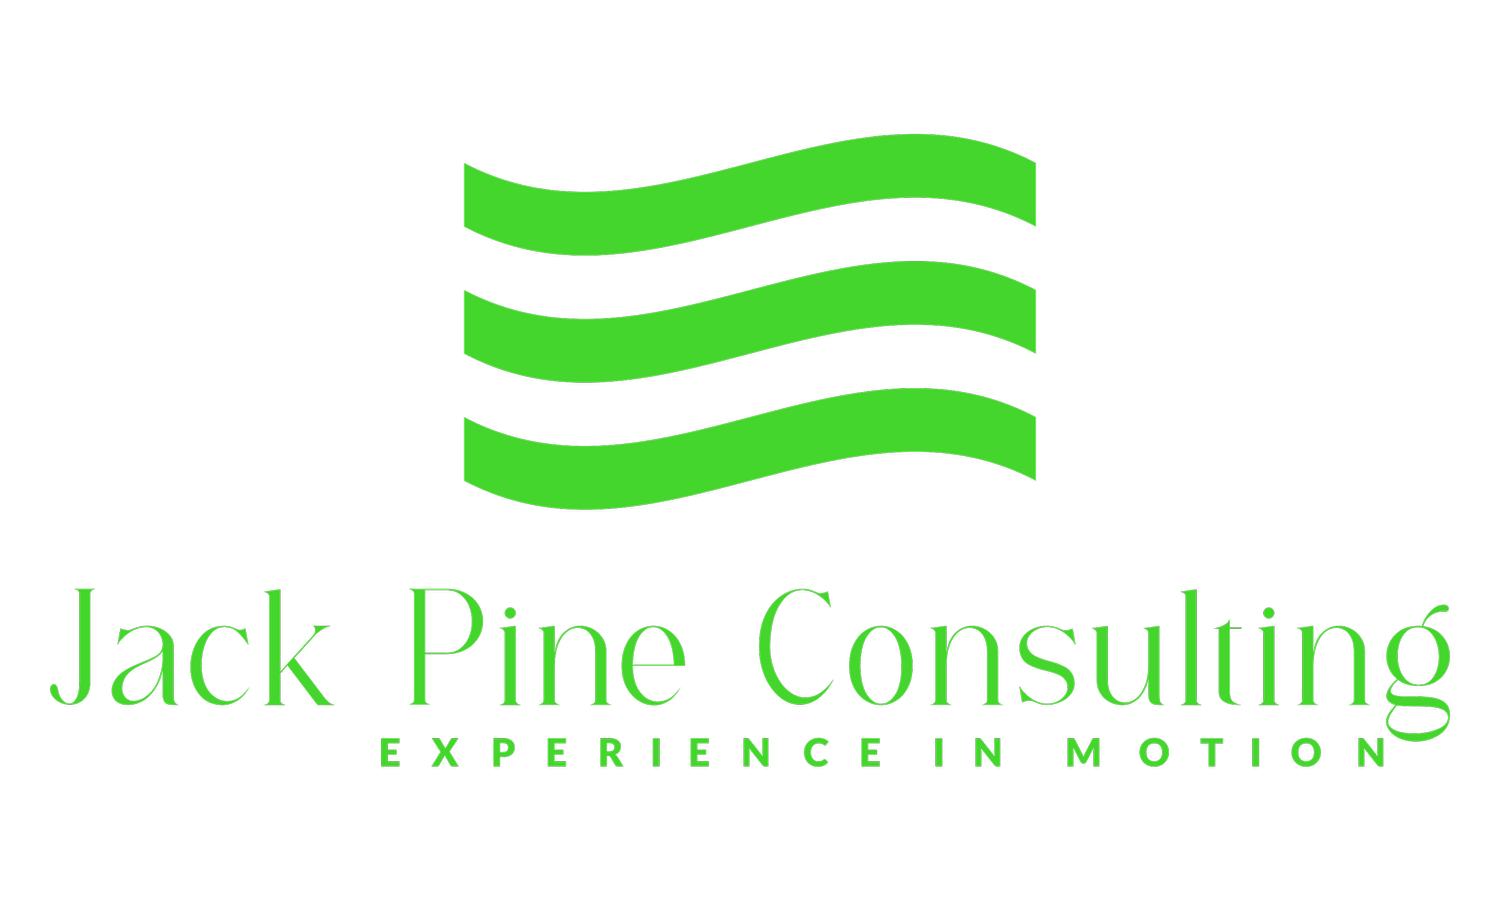 Jack Pine Consulting